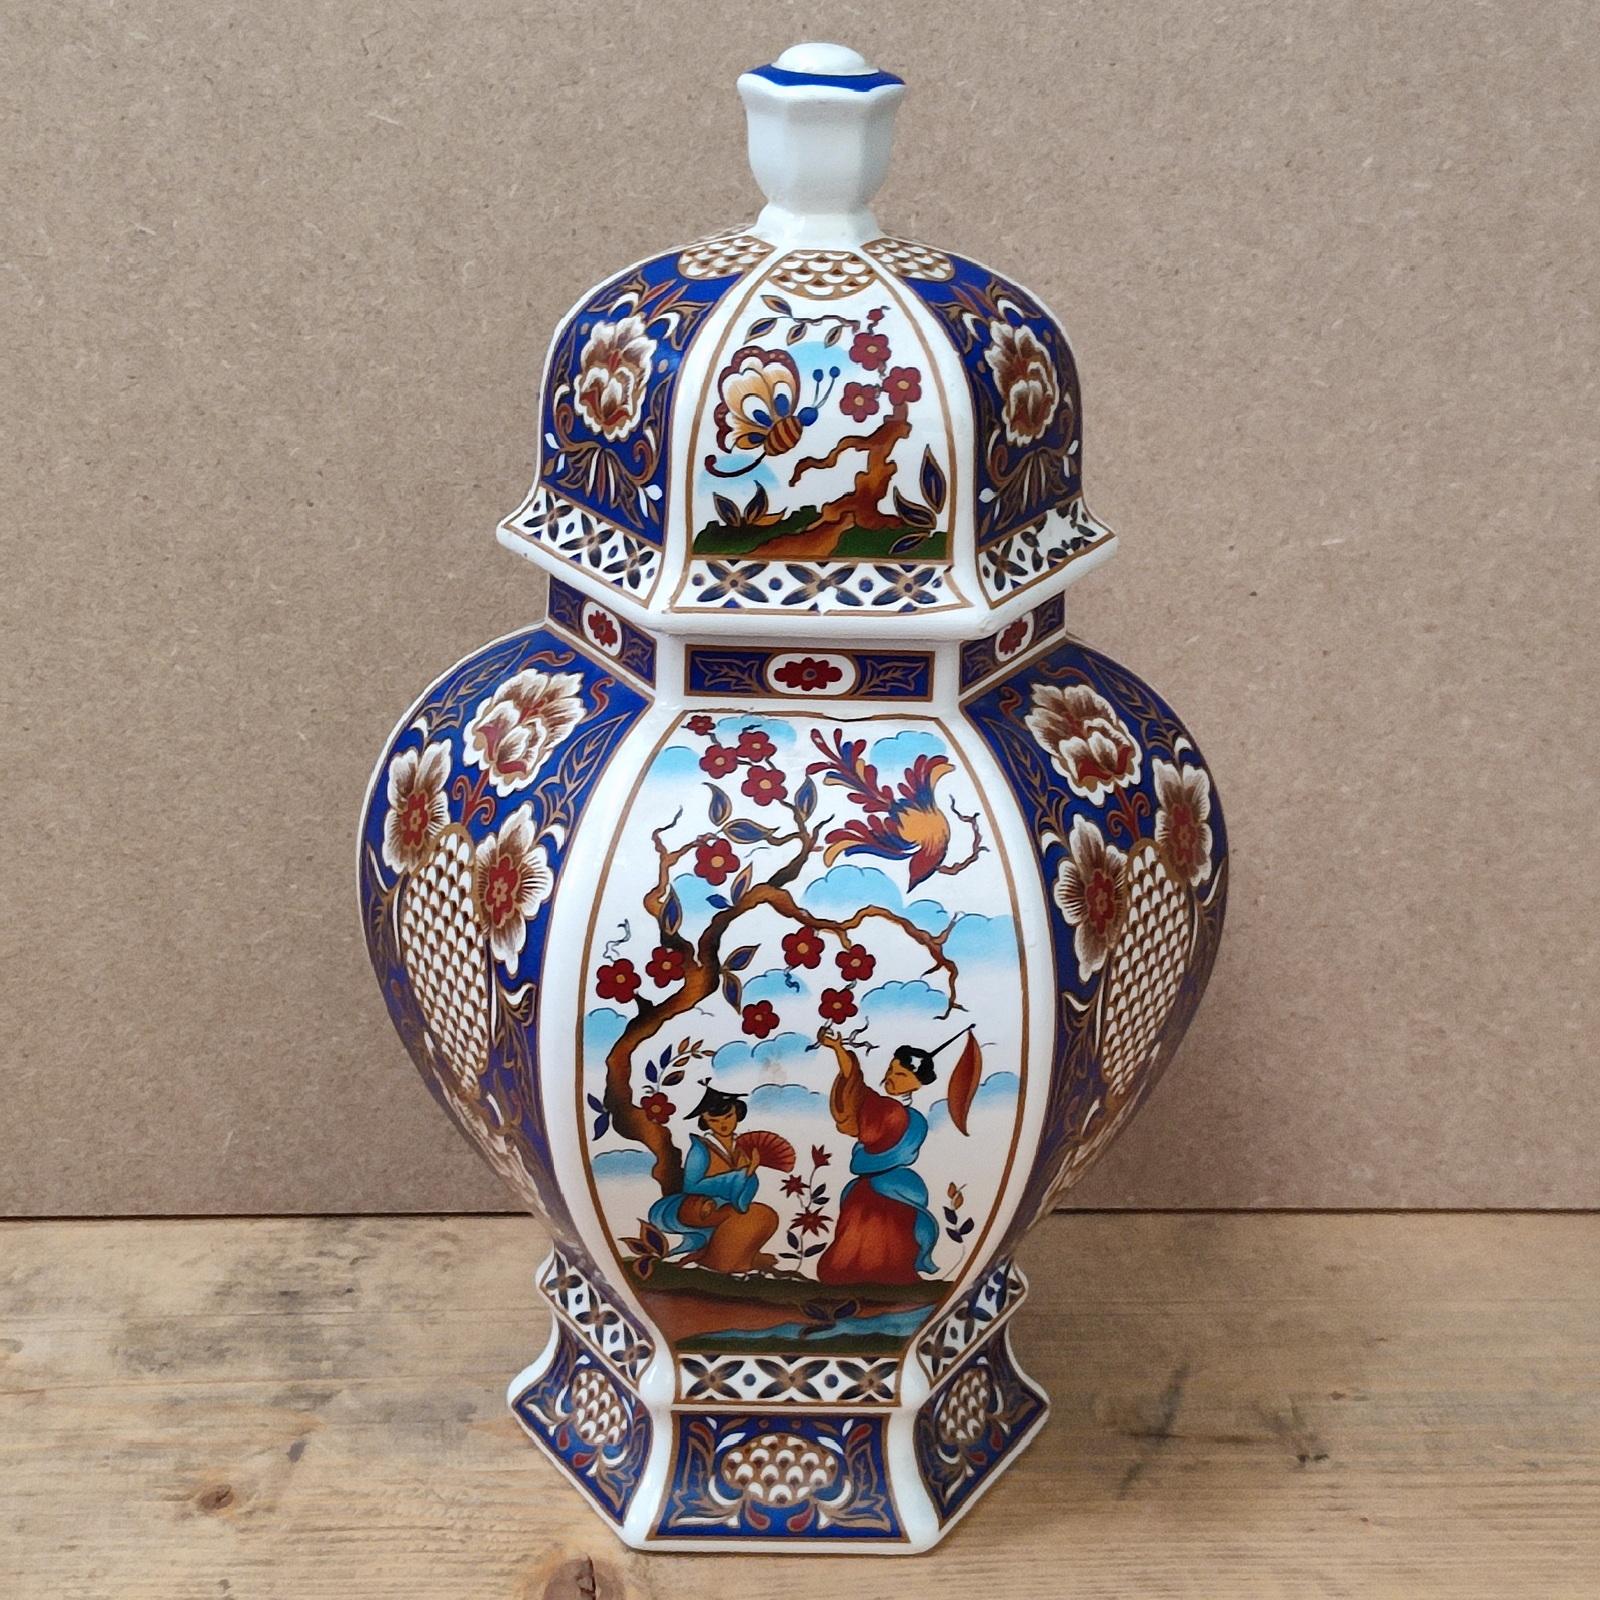 Pair of Japanese Porcelain Table Lamps and a Lidded Urn, Mid-20th Century For Sale 12